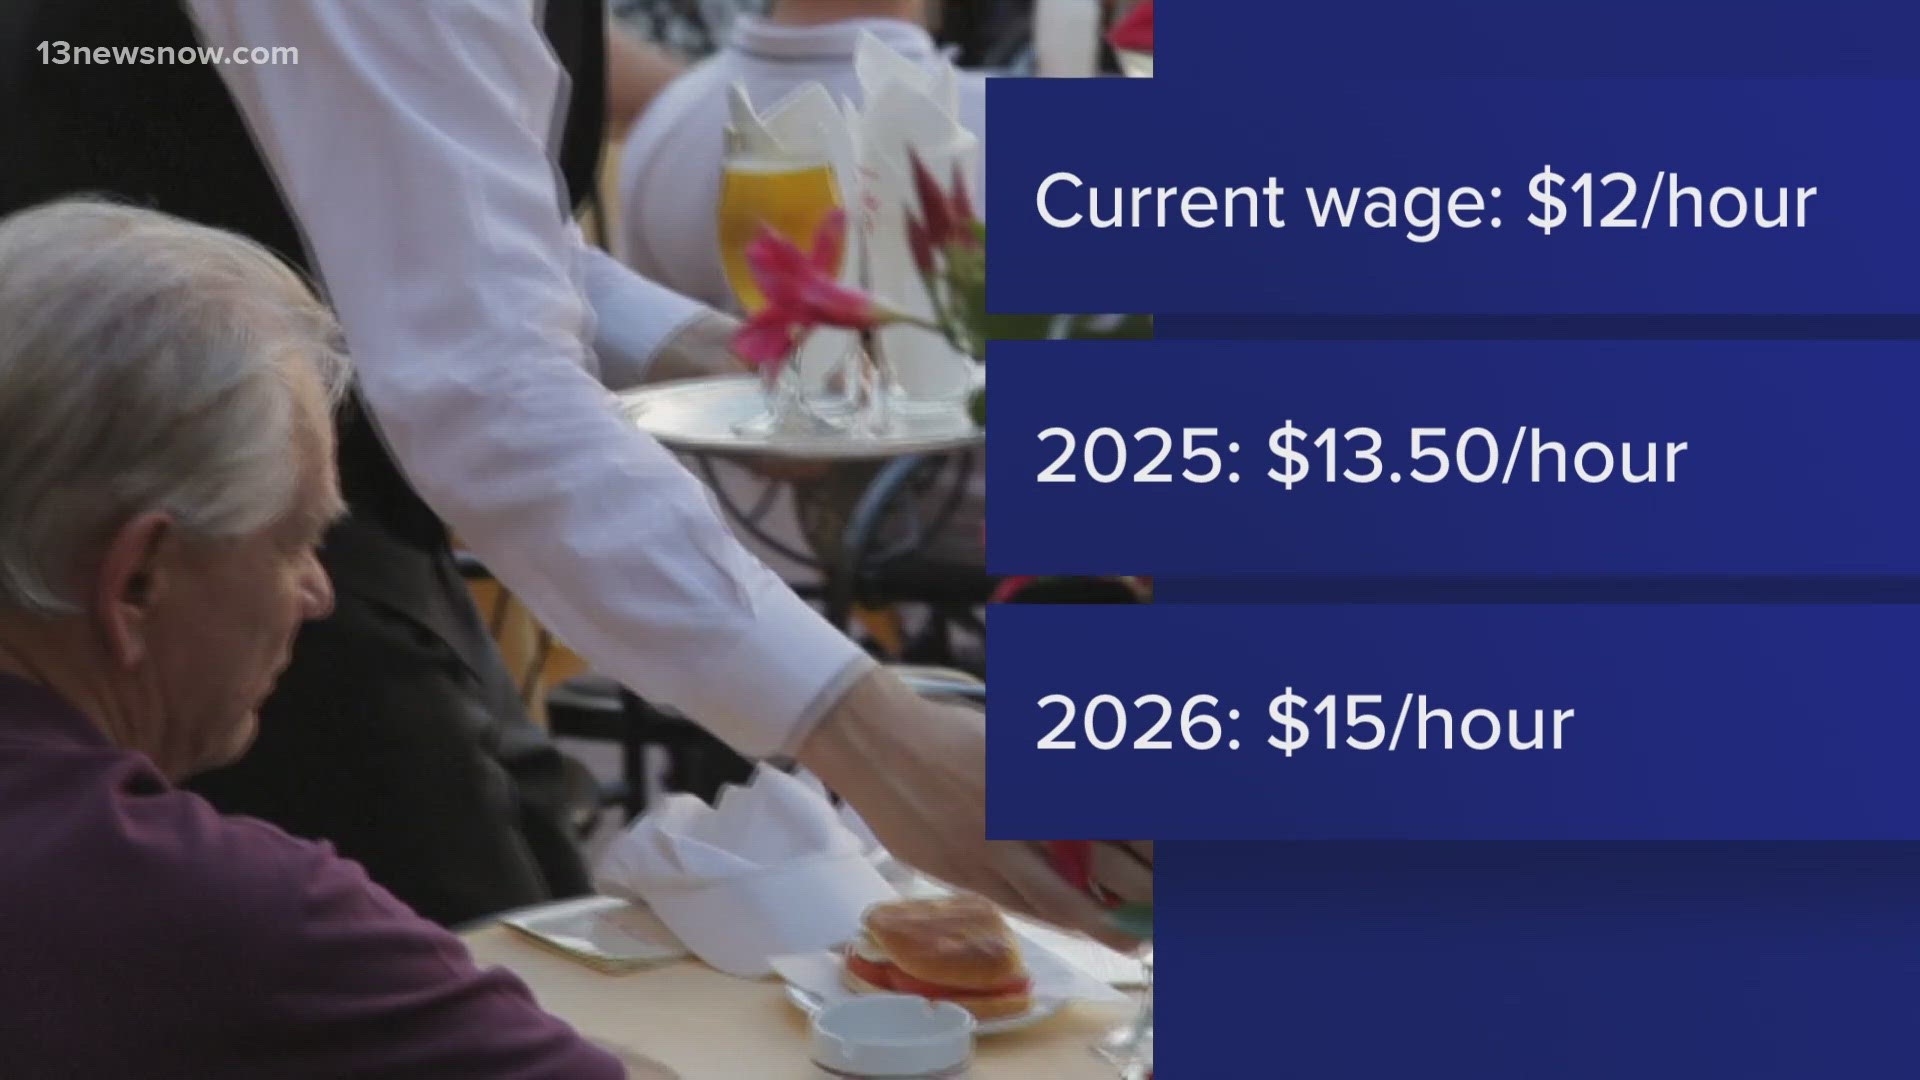 State lawmakers in the House and Senate passed bills to raise the minimum wage to 13 dollars and 50 cents per hour by 2025 and 15 dollars by 2026.